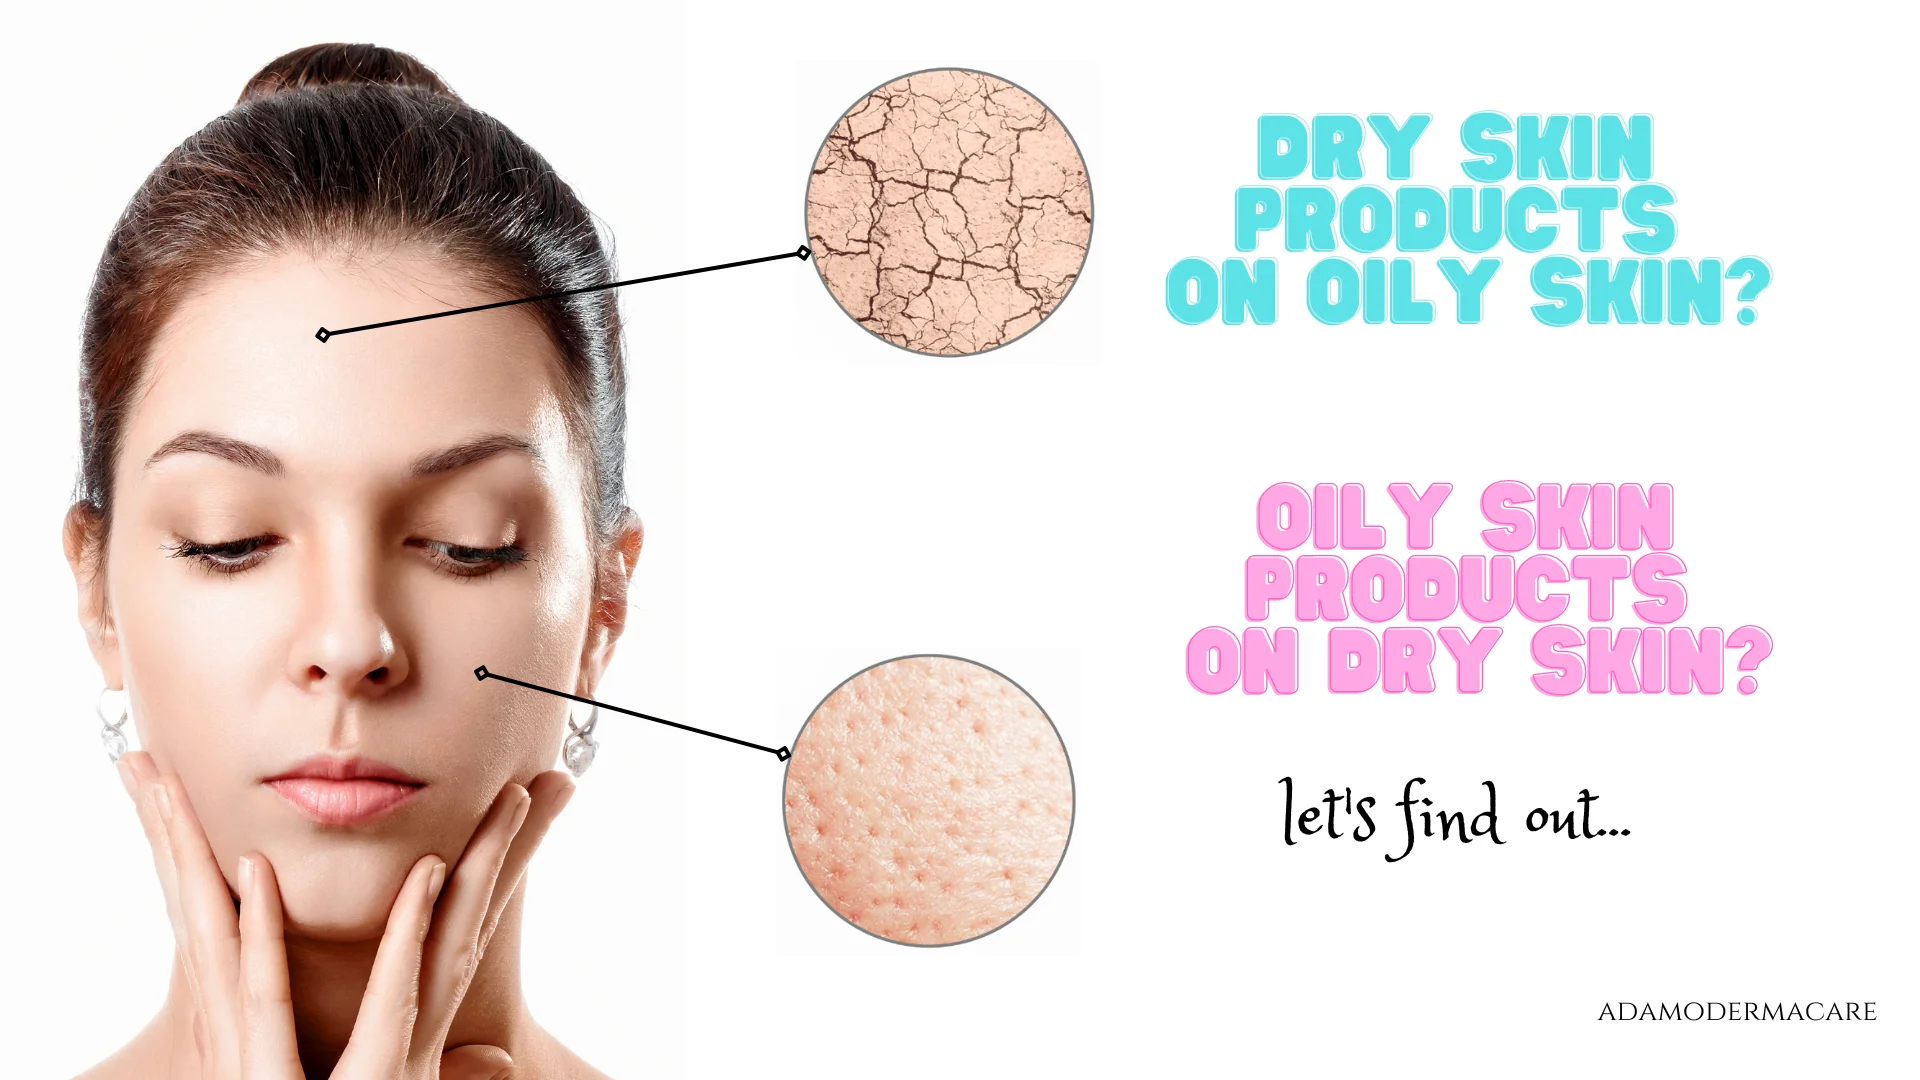 Can you use dry skin product on oily skin & oily skin product on dry skin?